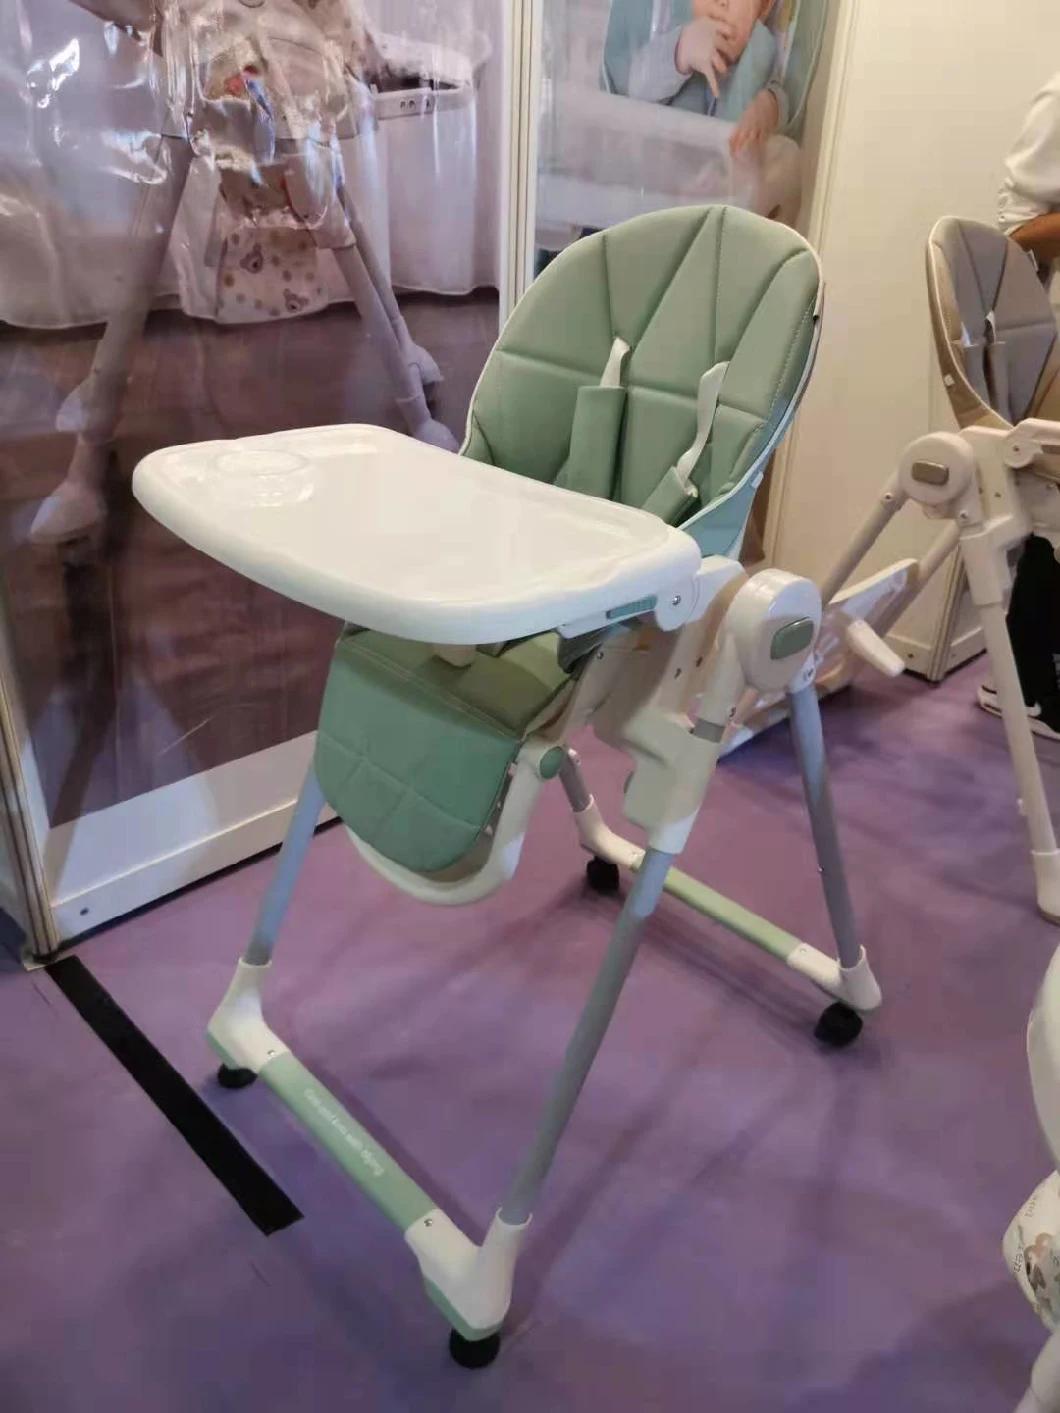 Hotsale Newborn Wooden Baby Cot Bed for Sale Near Me